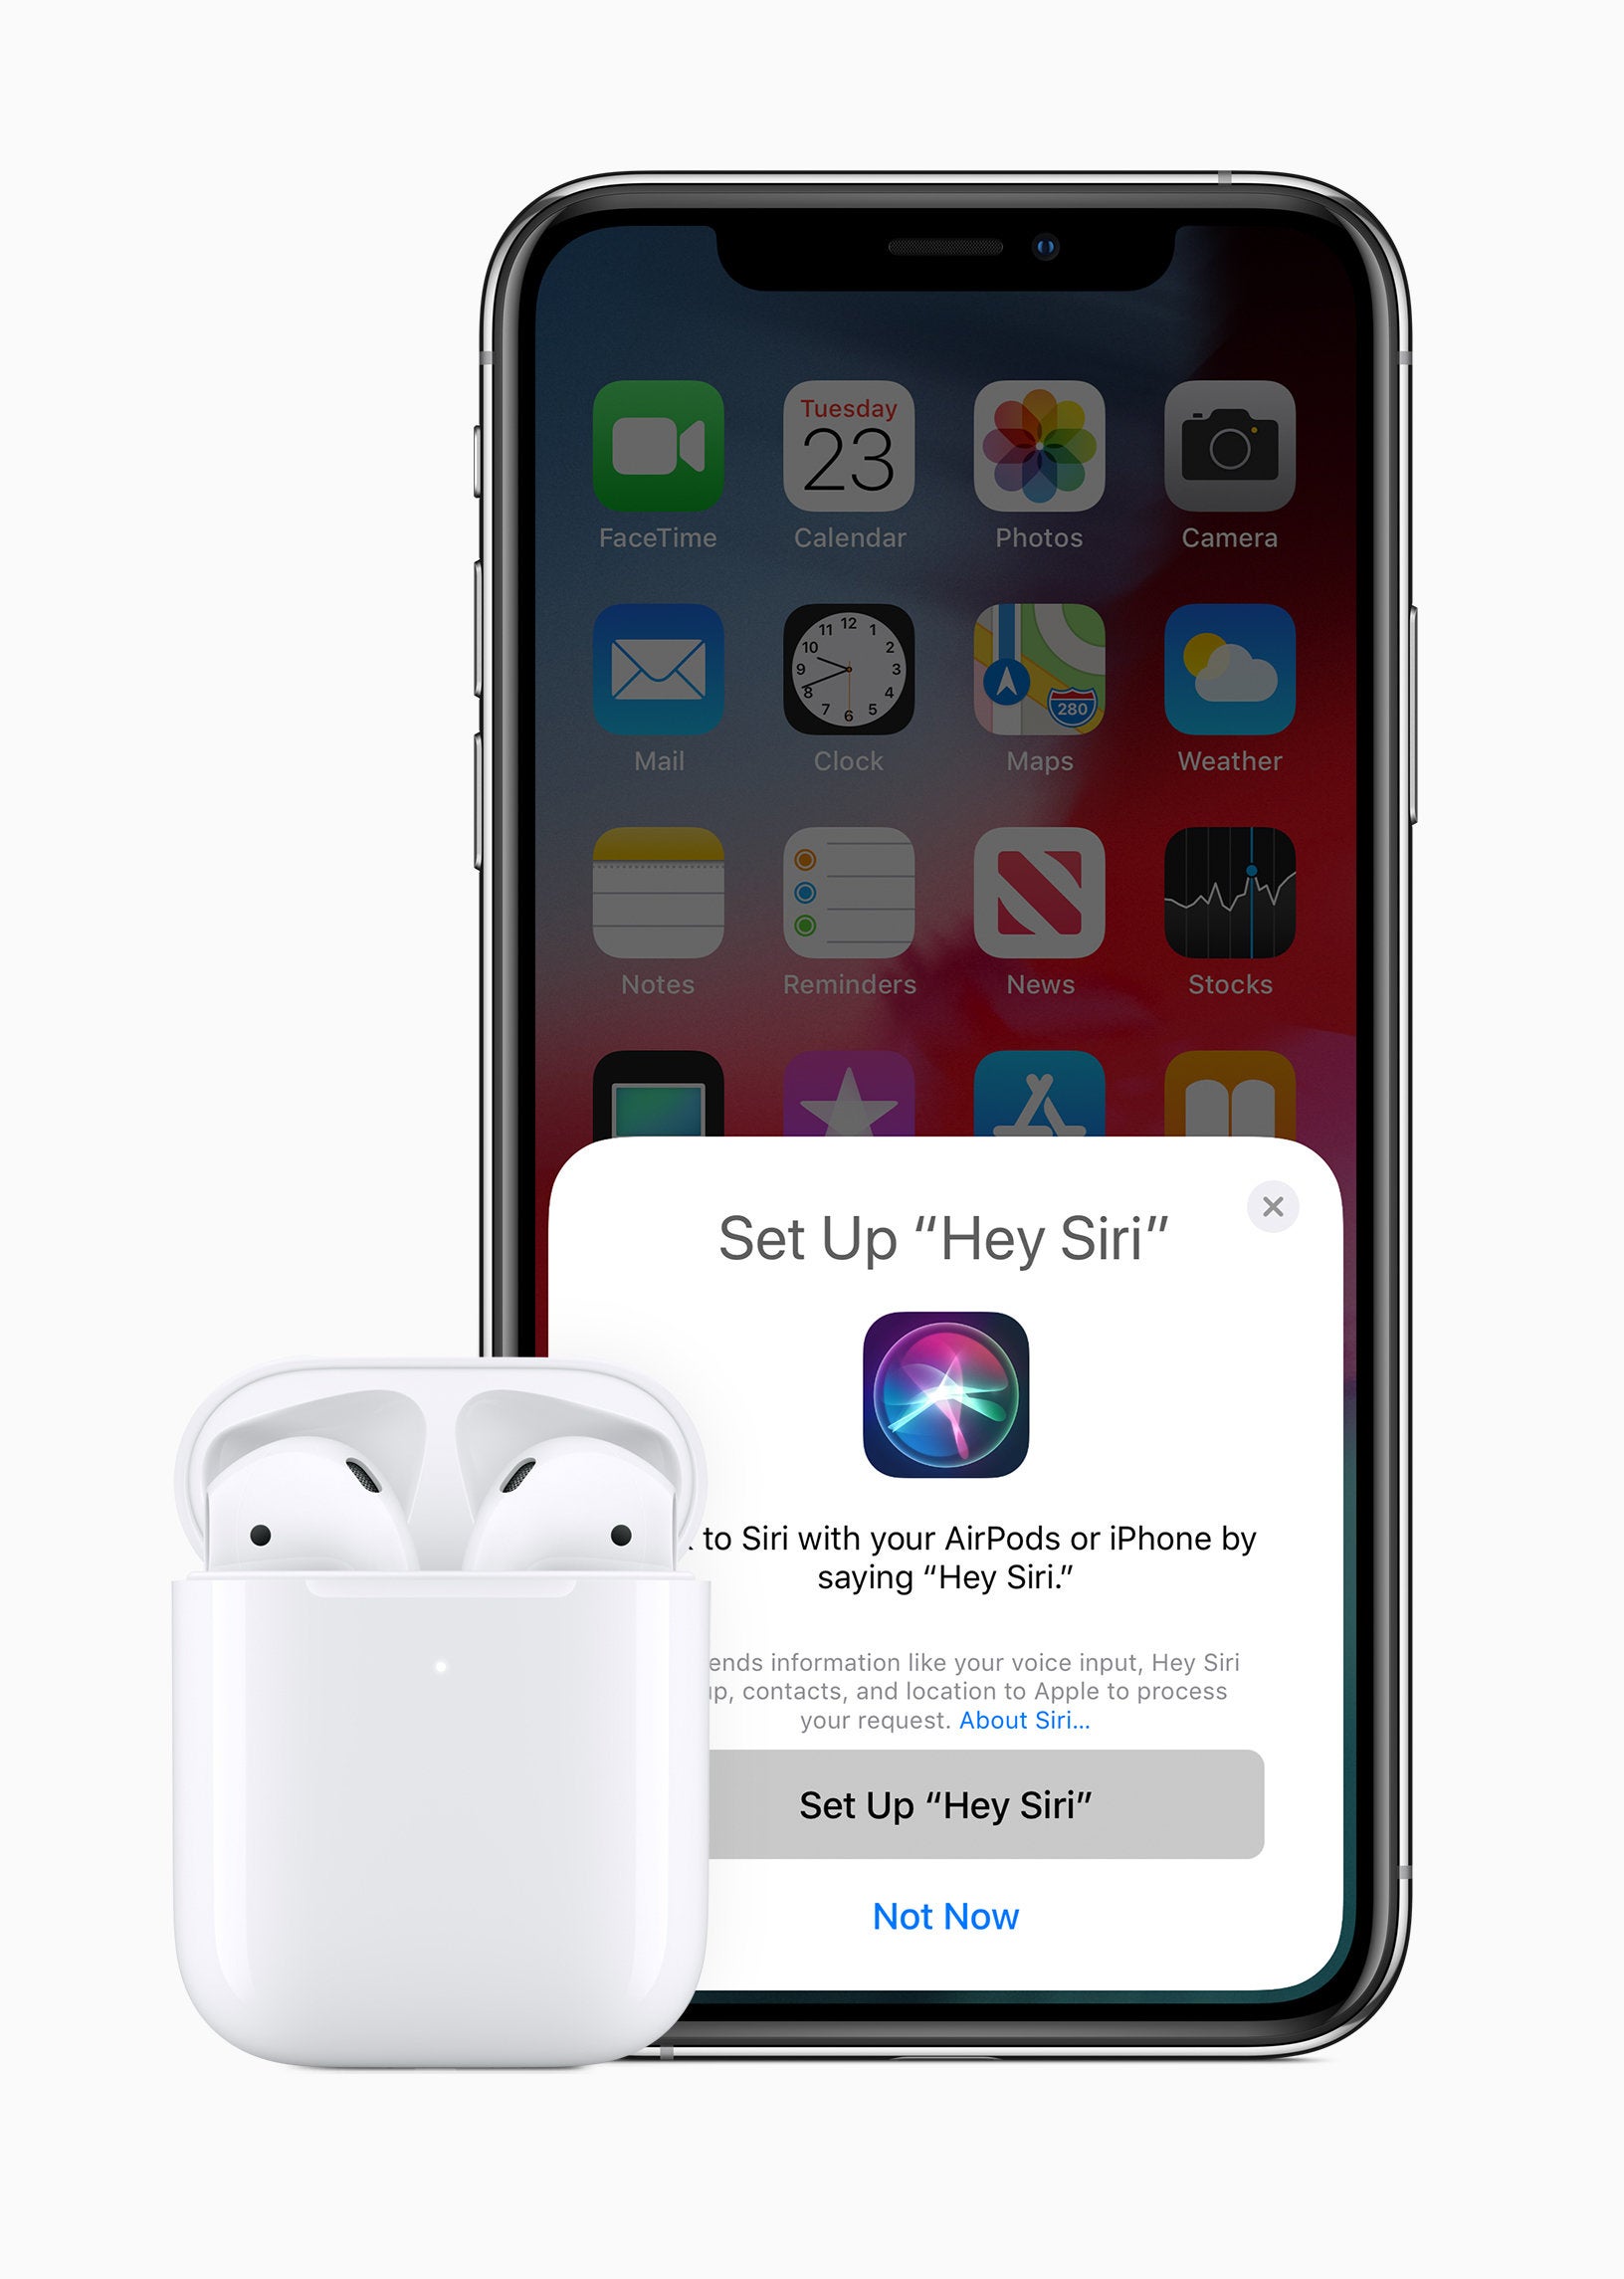 Apple AirPods 2nd-gen with wireless charging case - Apple outs 2nd generation AirPods with longer battery life, 'Hey Siri' and wireless charging